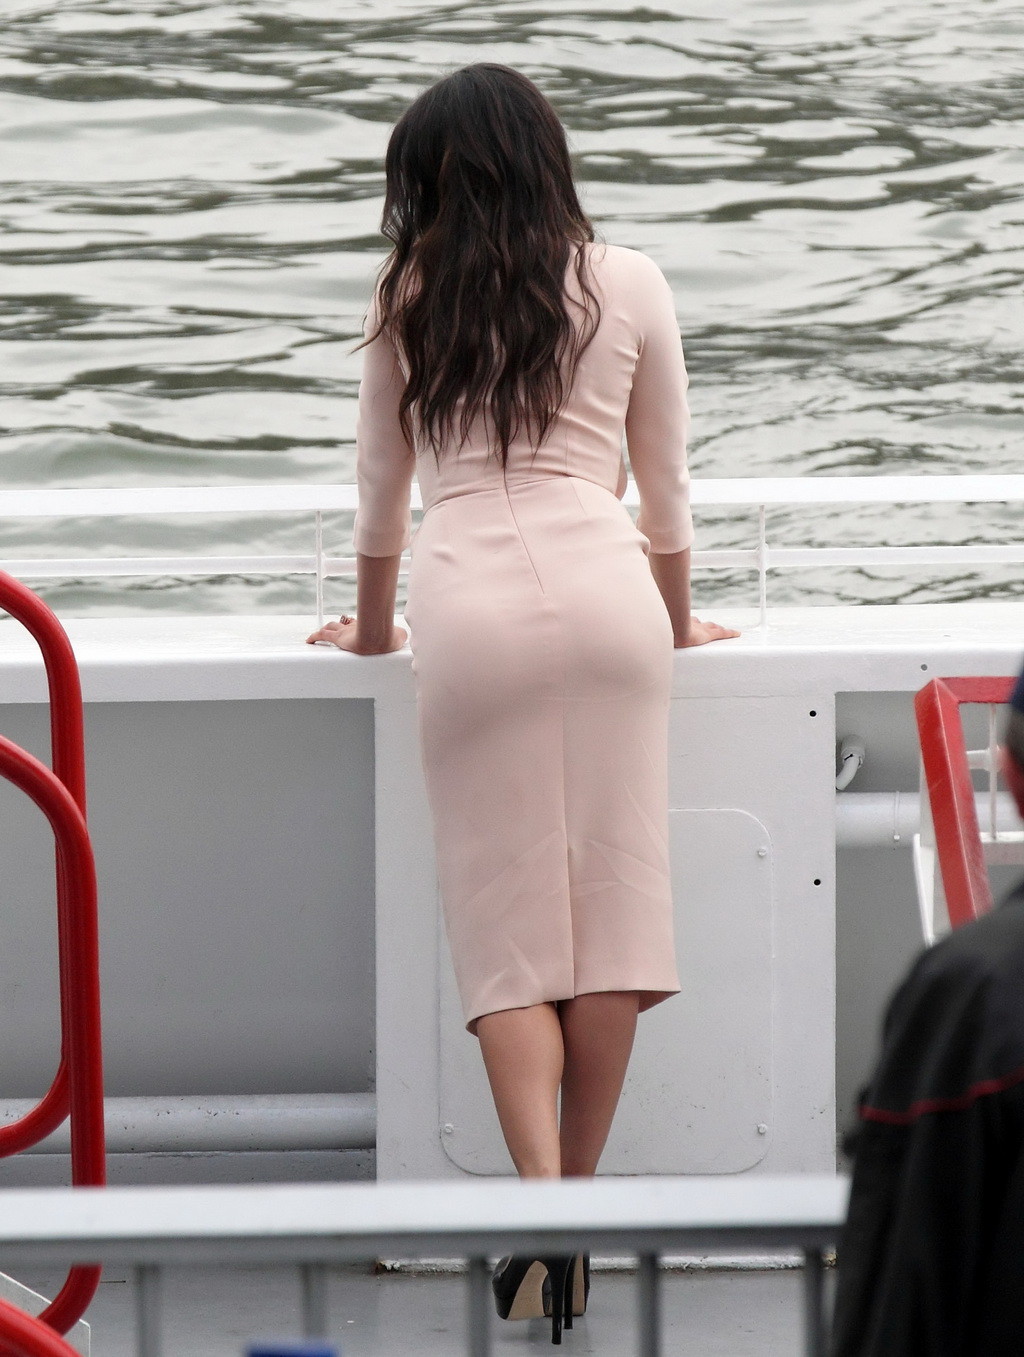 Mila Kunis Paparazzi Ass Photos At Christian Diors Yacht In Paris,and Out On A D